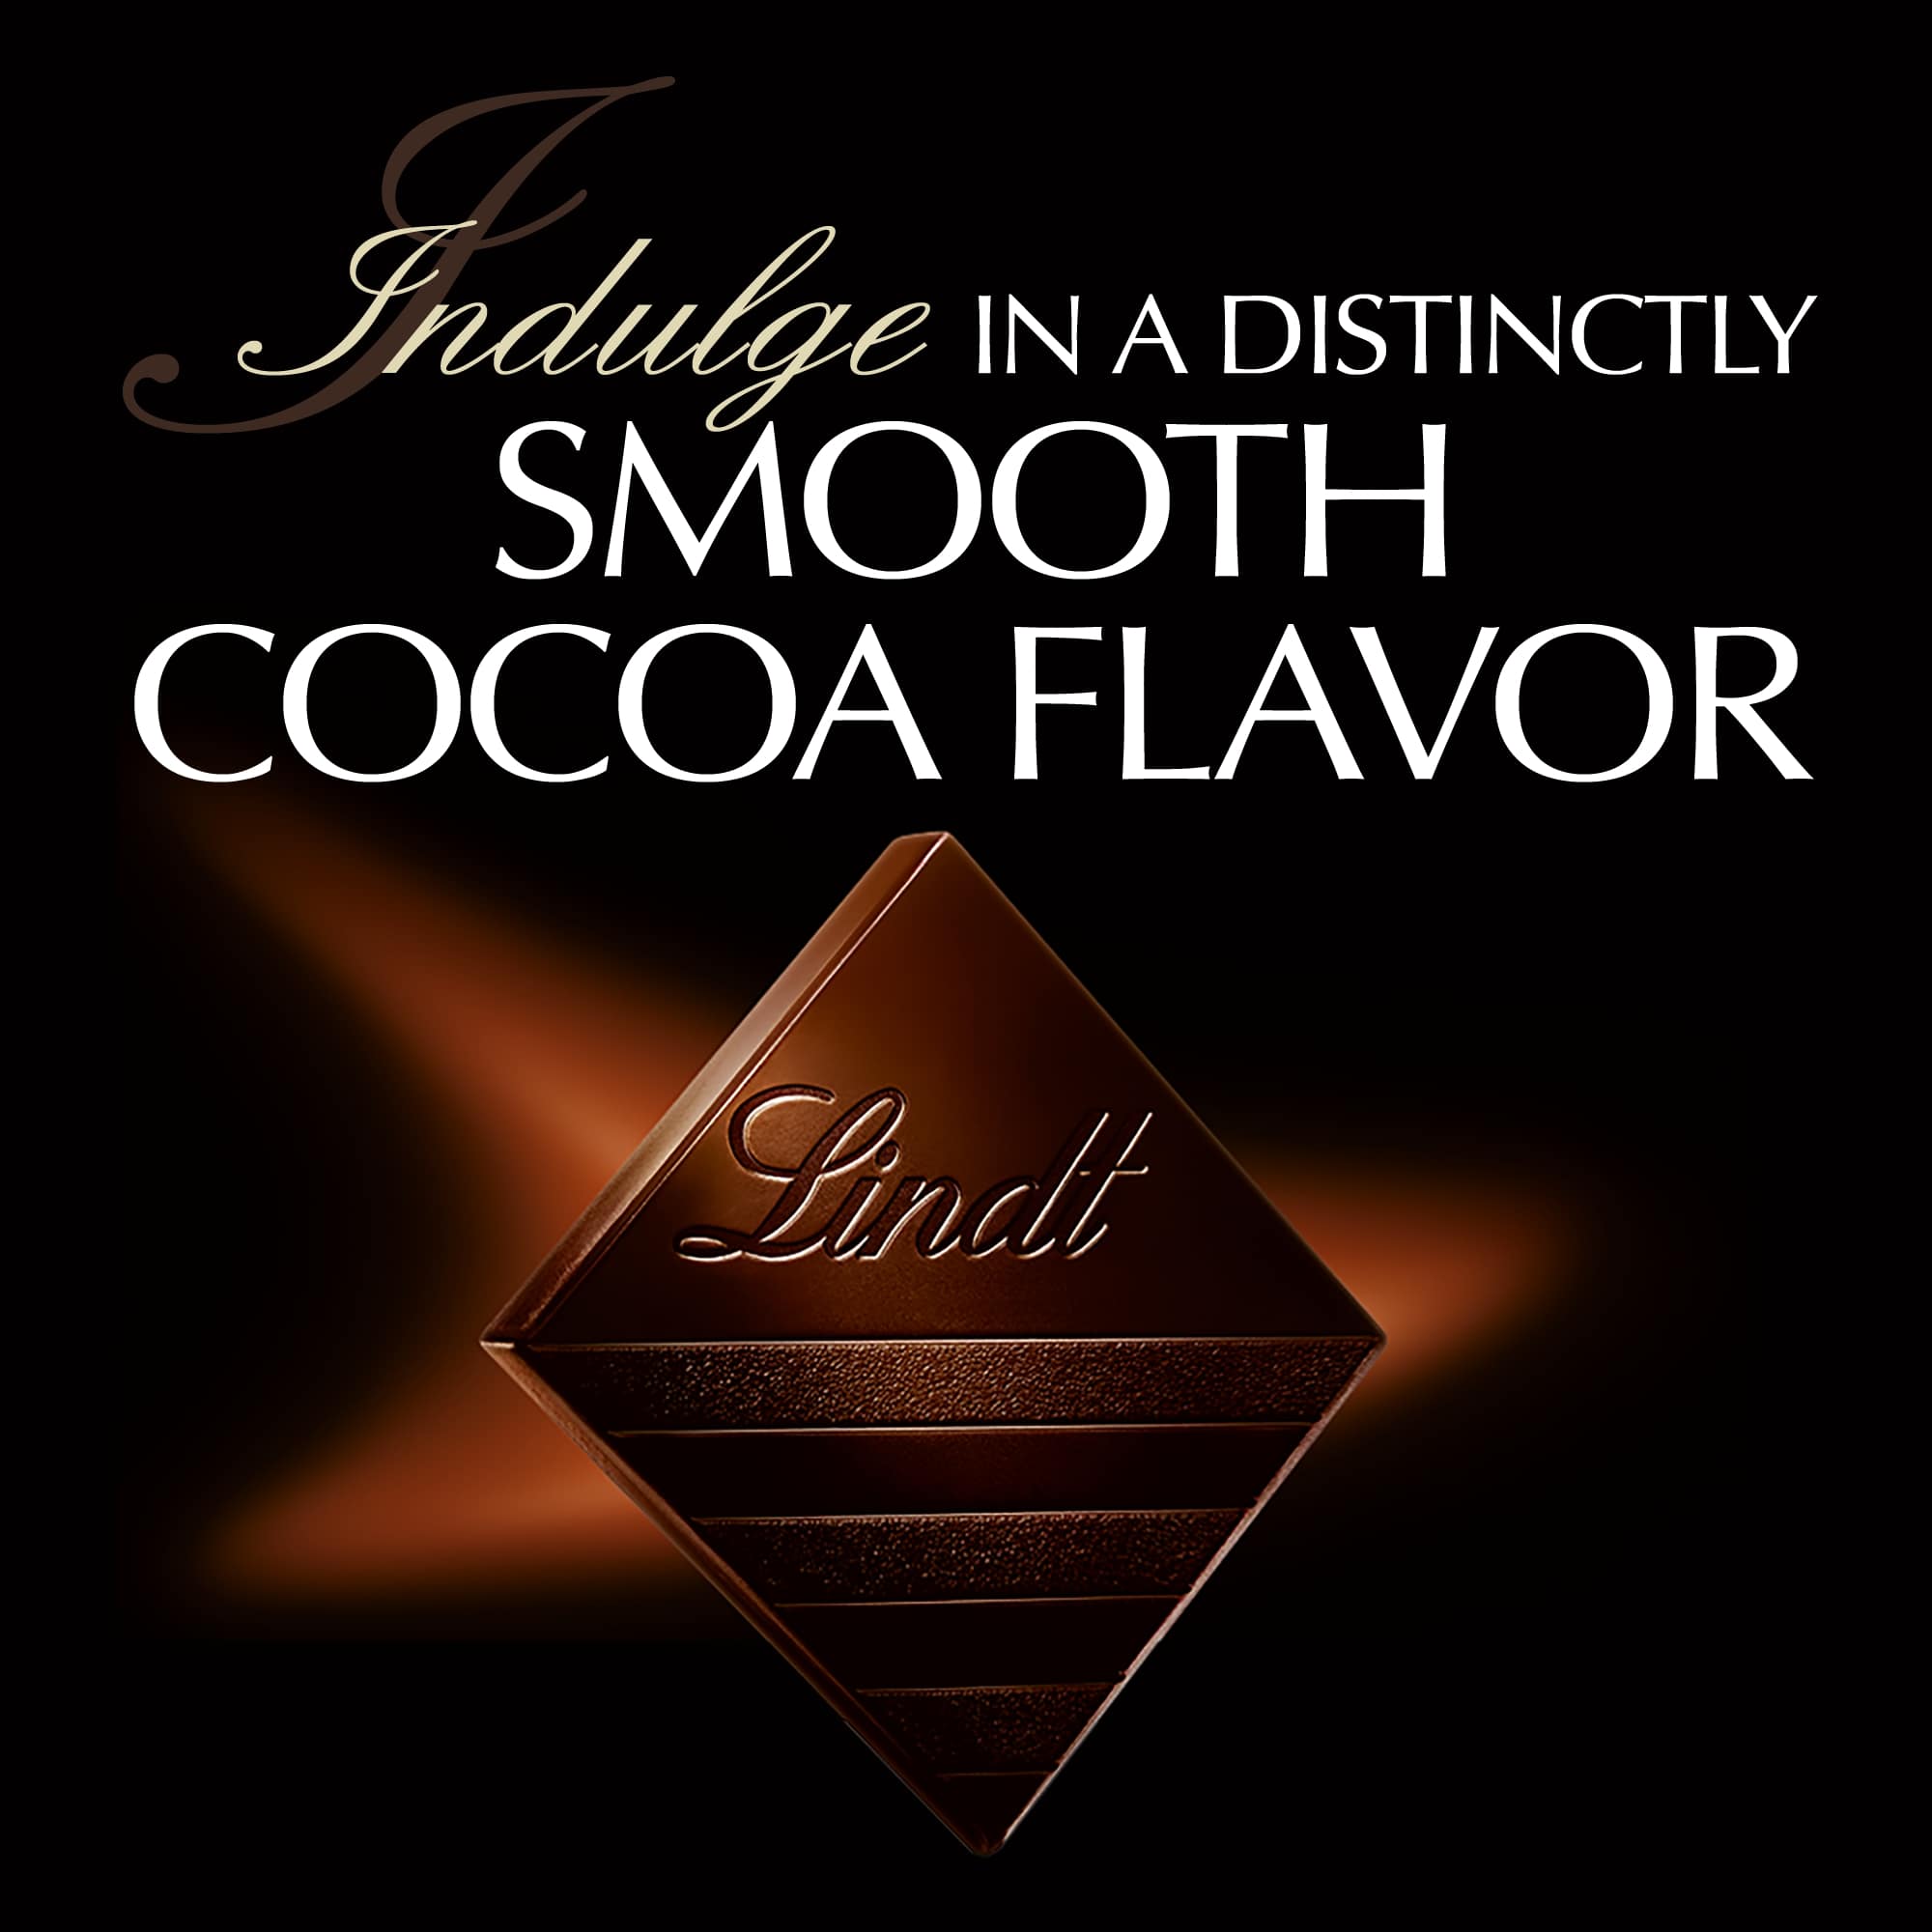 Lindt EXCELLENCE 78% Cocoa Dark Chocolate Bar, Easter Chocolate Candy, 3.5 oz. - image 4 of 16